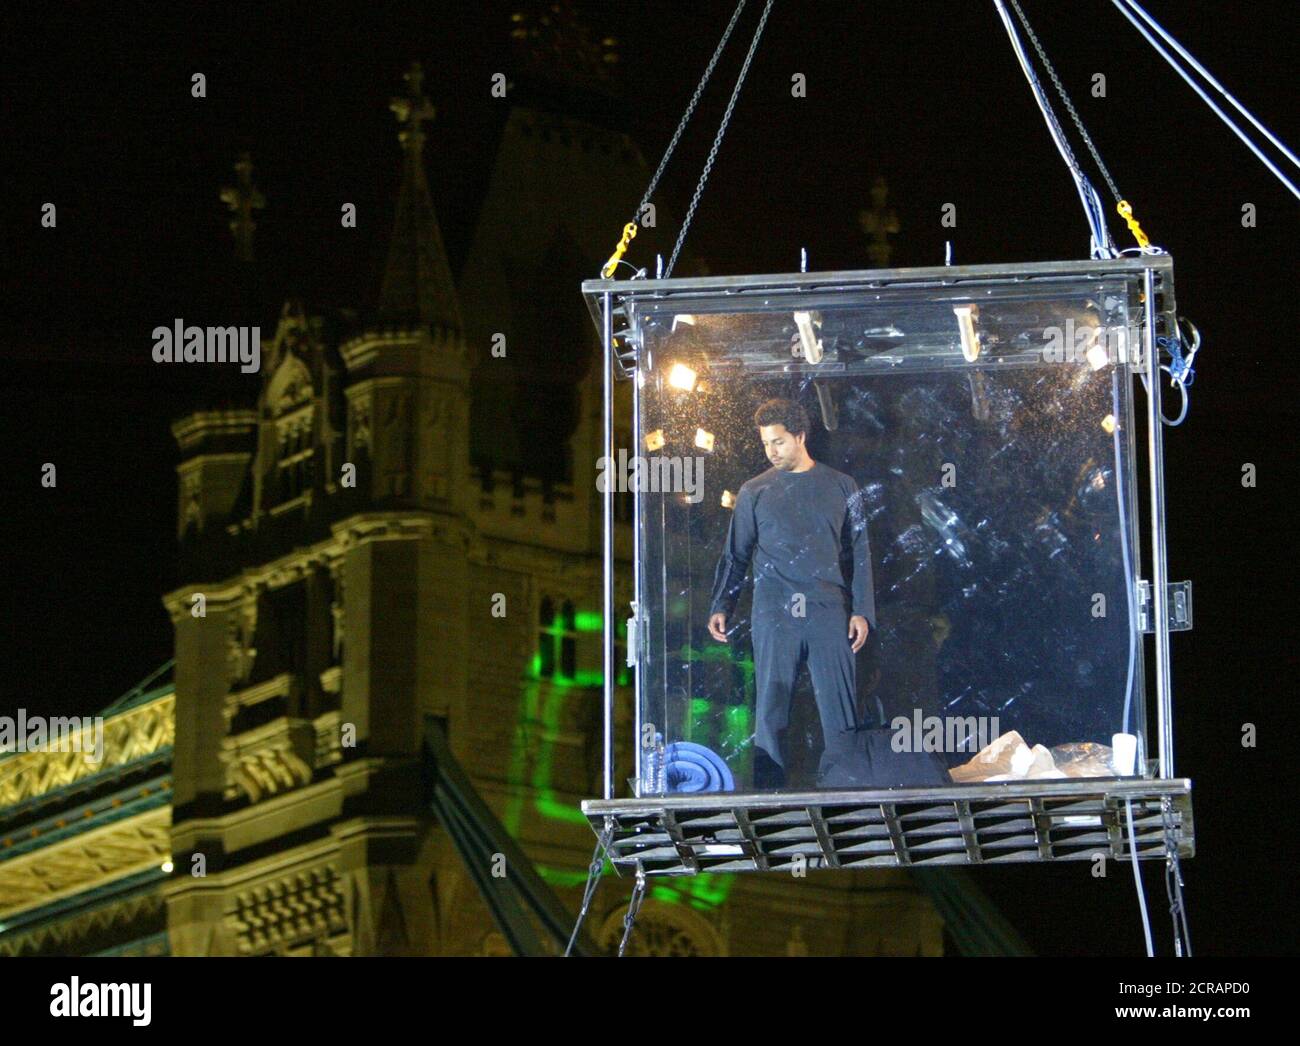 U.S. illusionist David Blaine embarks on 44 days of starvation and solitary  confinement in a glass box hung from crane by River Thames in London  September 5, 2003. Blaine will be encased